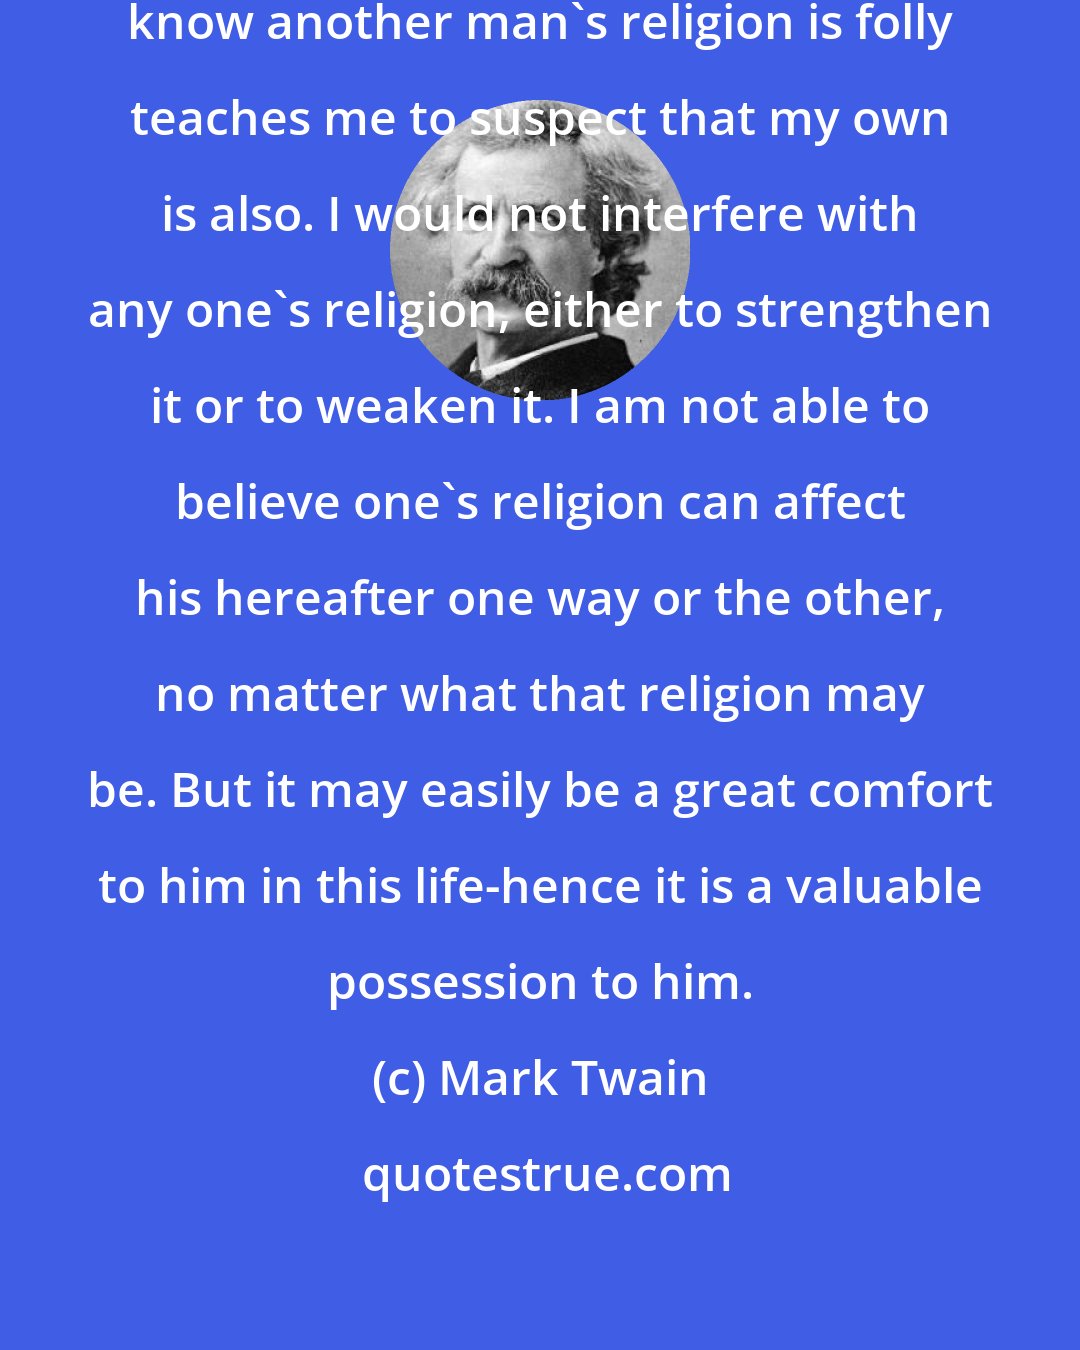 Mark Twain: The easy confidence with which I know another man's religion is folly teaches me to suspect that my own is also. I would not interfere with any one's religion, either to strengthen it or to weaken it. I am not able to believe one's religion can affect his hereafter one way or the other, no matter what that religion may be. But it may easily be a great comfort to him in this life-hence it is a valuable possession to him.